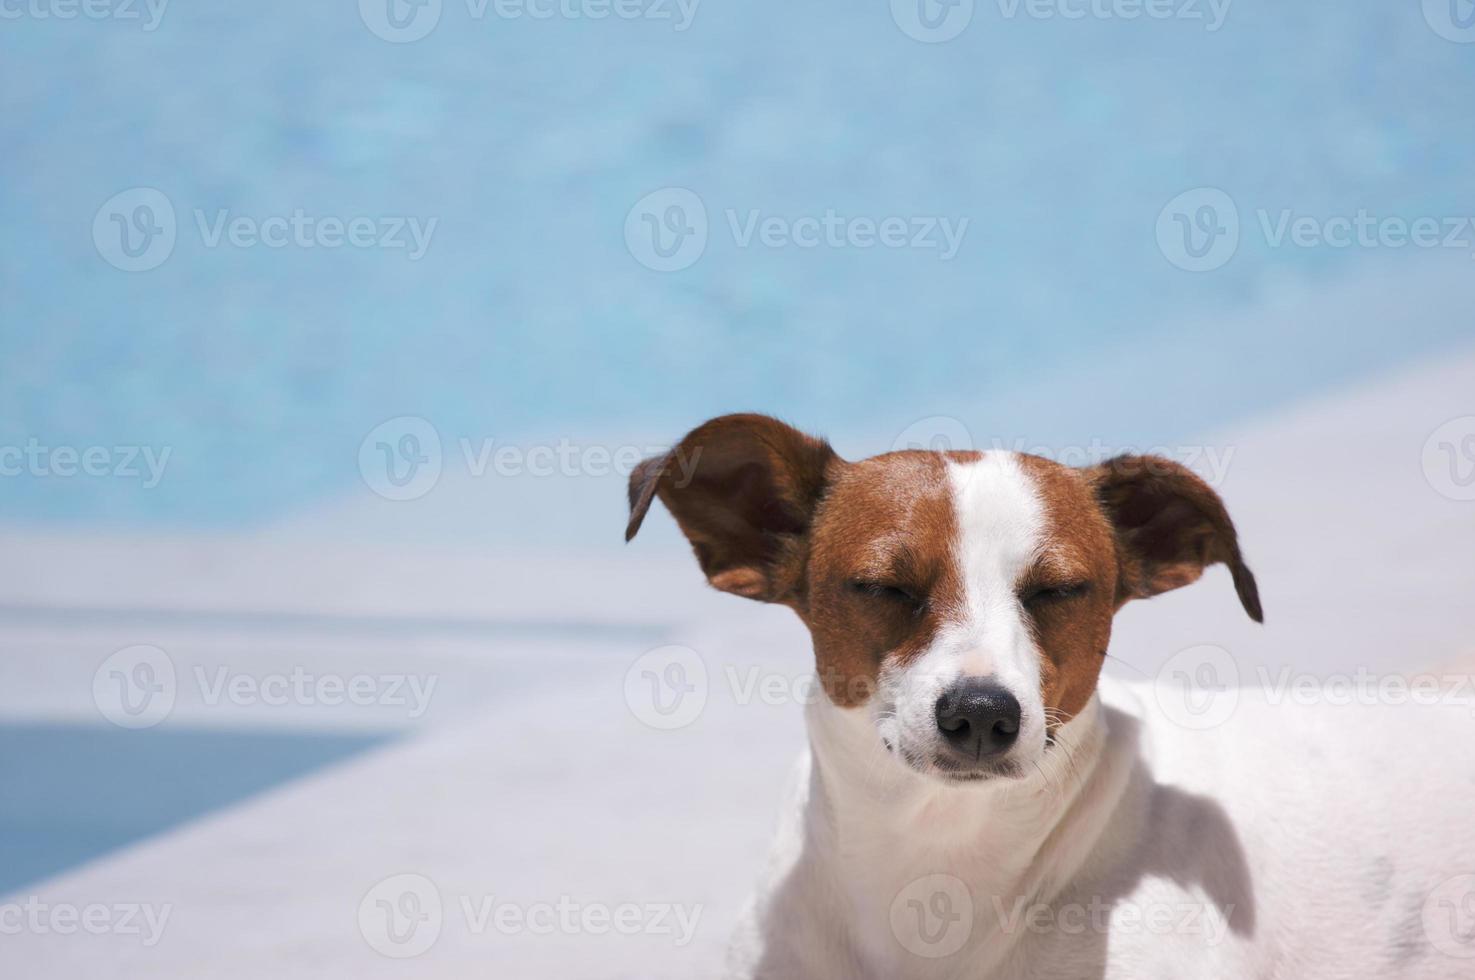 Cute Jack-Russel dog chilling photo